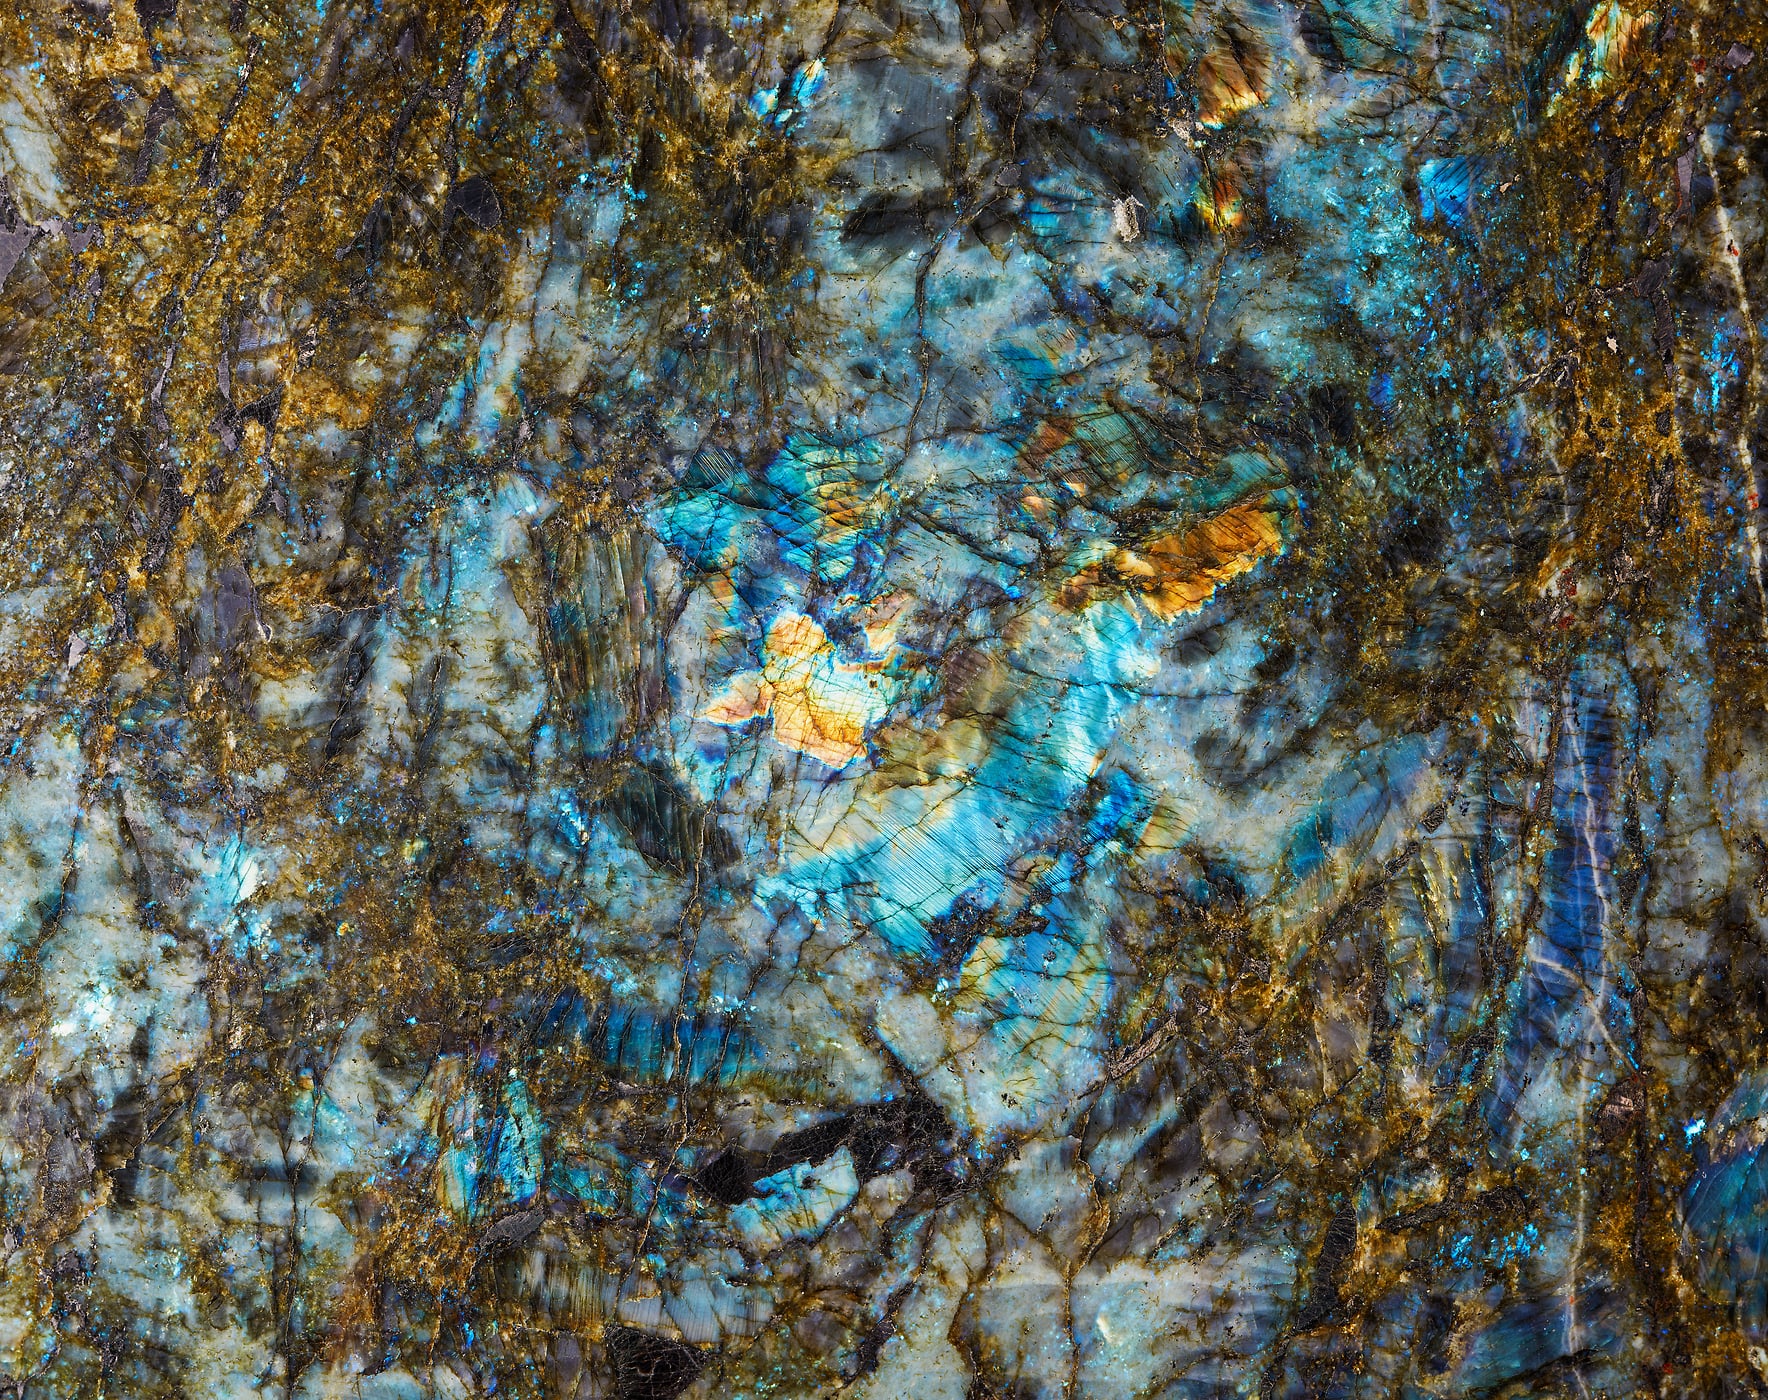 303 megapixels! An ultra-high-resolution texture photo file of lemurian blue granite stone; gigapixel photograph created by David Lineton.